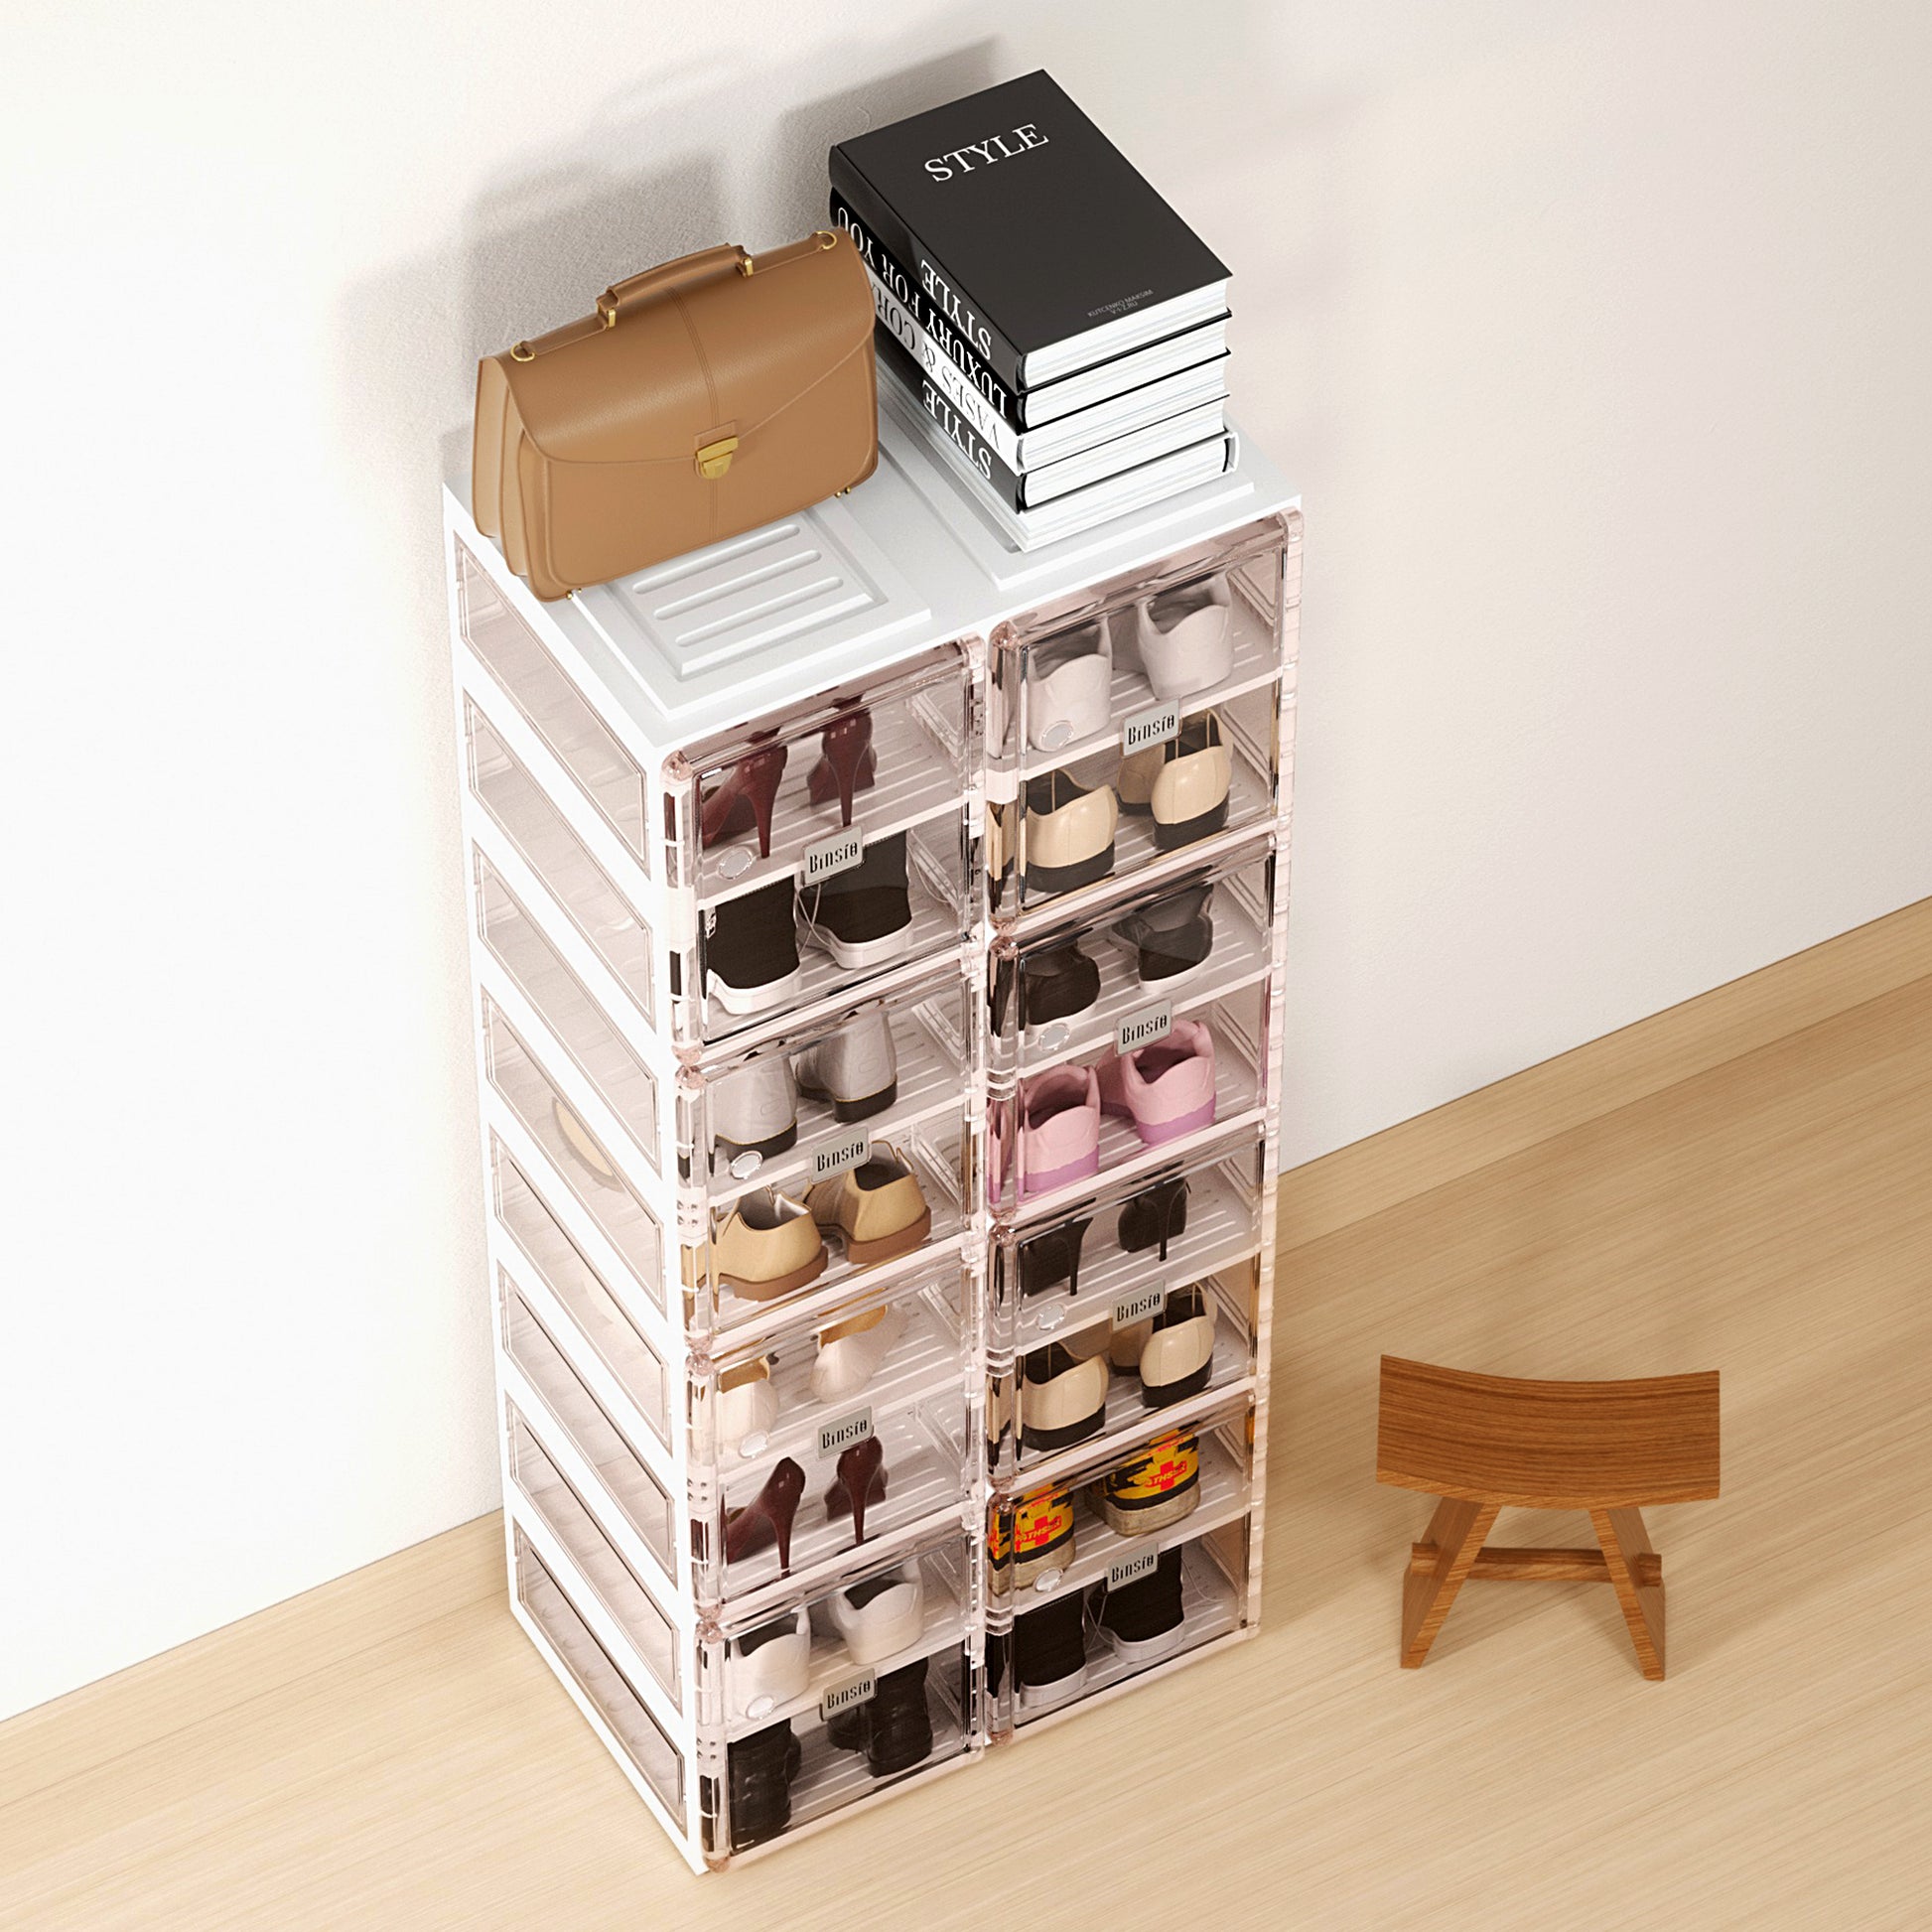  BINSIO Shoe Rack Closet Organizer and Storage, Portable for  Entry Way, Foldable Boxes, Fast Easy Assemble Cabinet, One Piece Sturdy  Plastic Shelf, Clear Brown Doors, 6 Tiers : Home & Kitchen